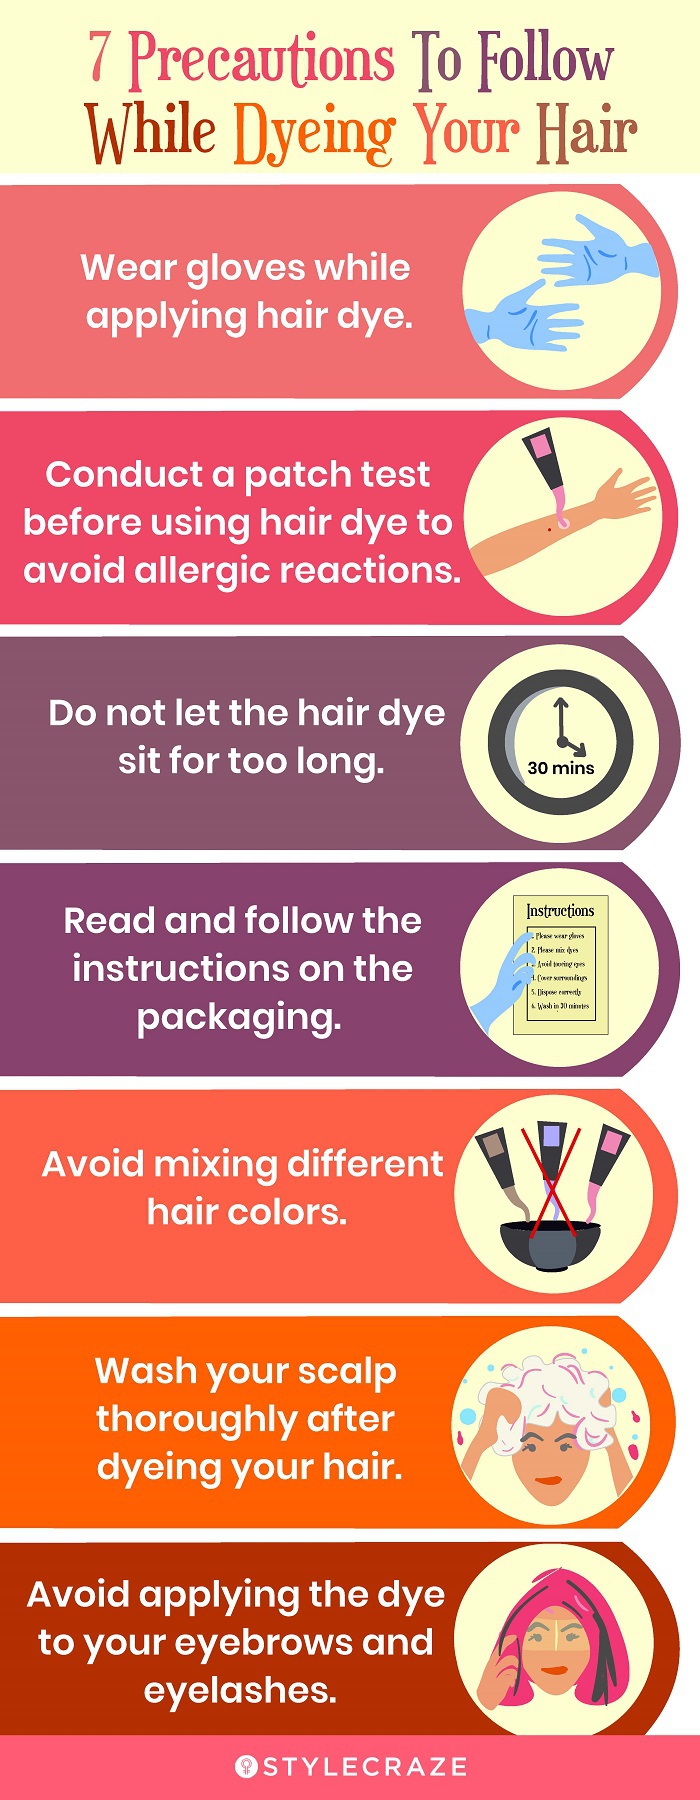 7 precautions to follow while dyeing your hair (infographic)